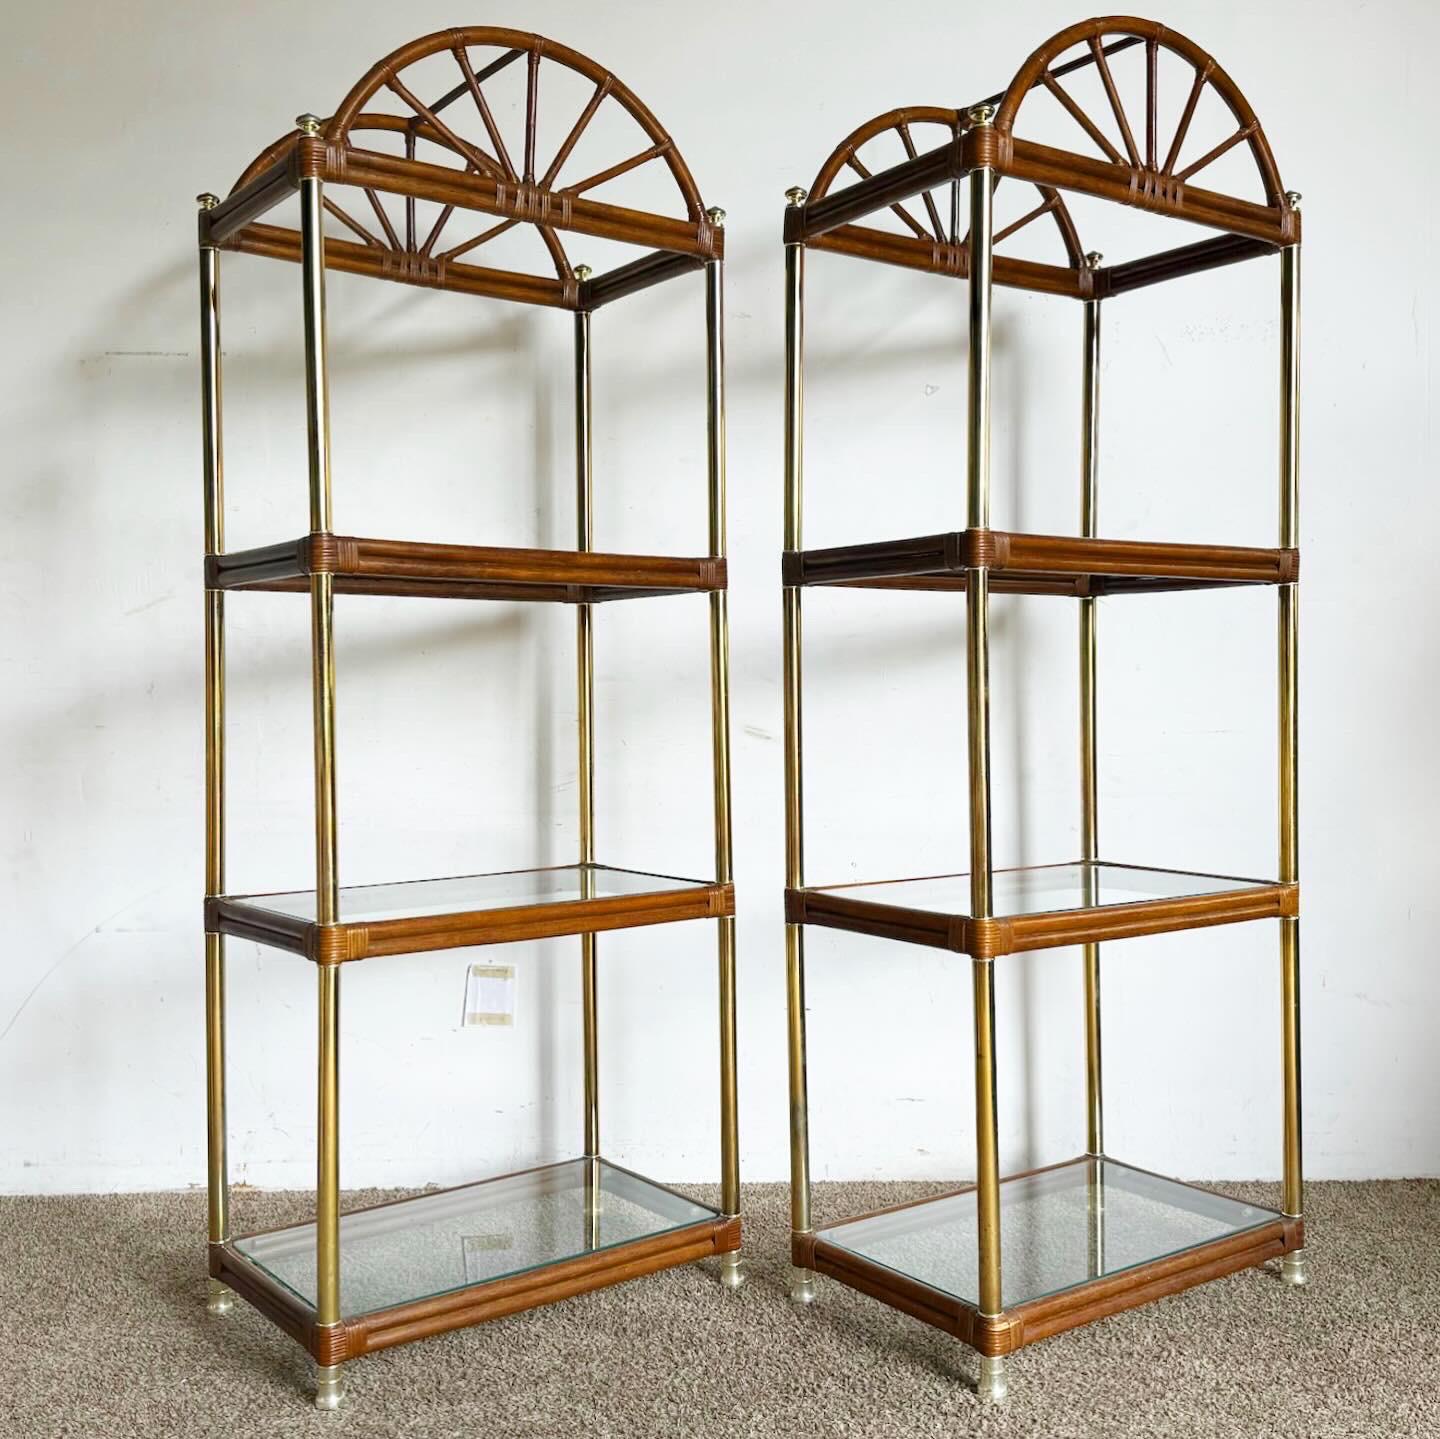 The Boho Chic Regency Gold and Bamboo Rattan Etageres, a pair, blend regal elegance with natural textures. Featuring gold-toned metal frames and bamboo rattan shelves, they offer a luxurious yet earthy look. The gold frames add glamour, while the